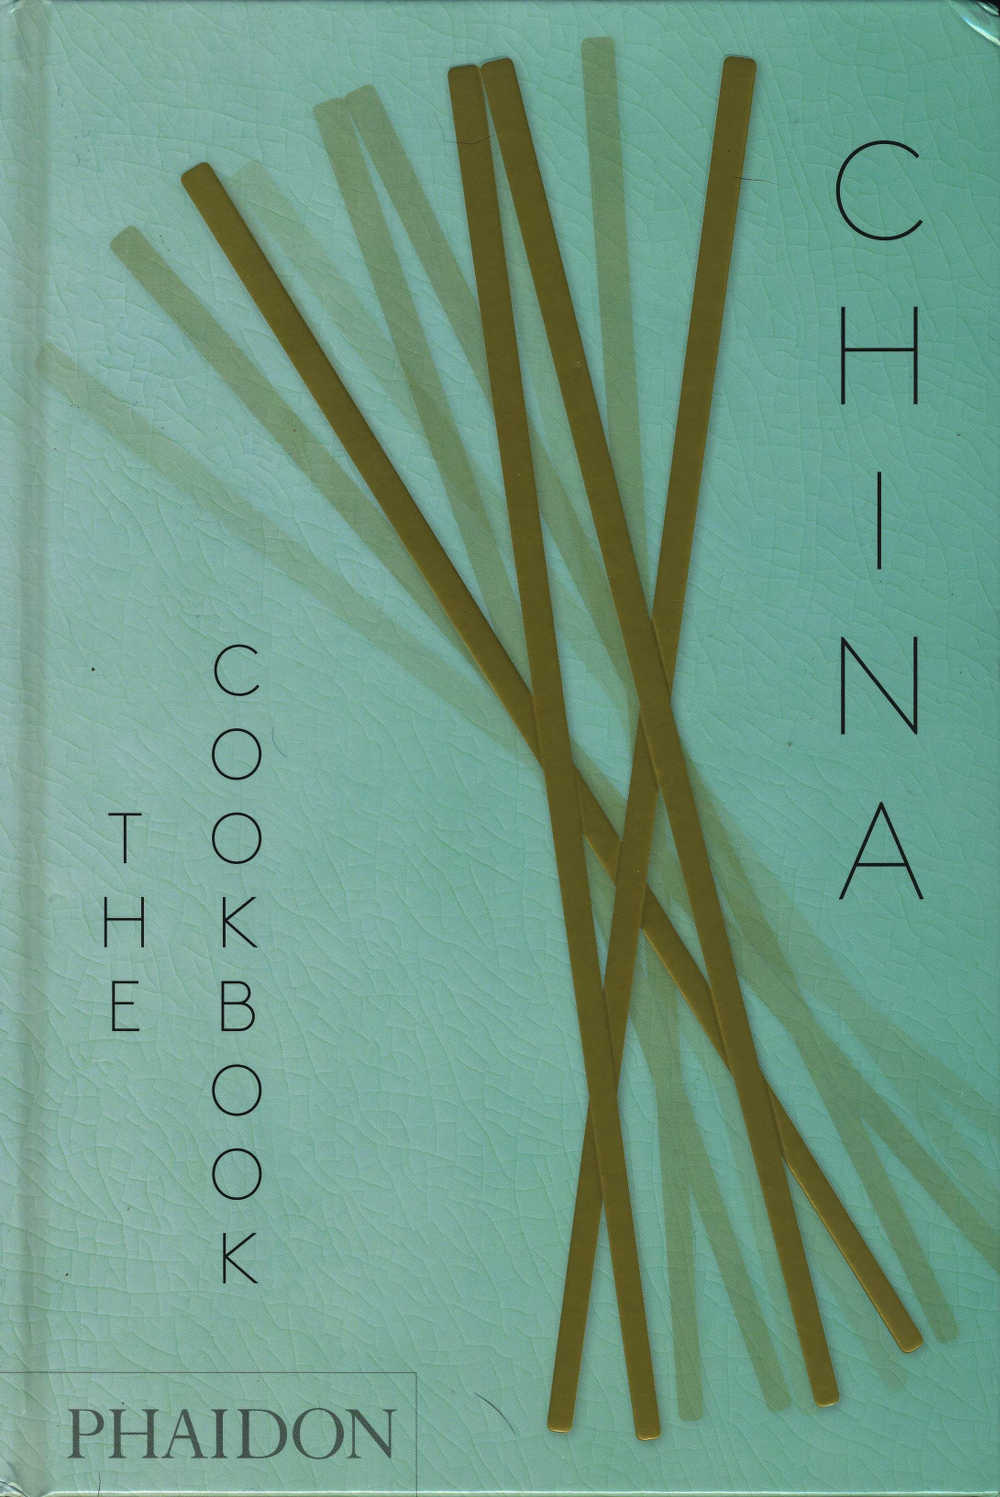 China, The Cookbook by Kei Lum and Diora Fong-Chan (Phaidon; hardback 720pp, colour photographs throughout; €39.95, stg£29.99)